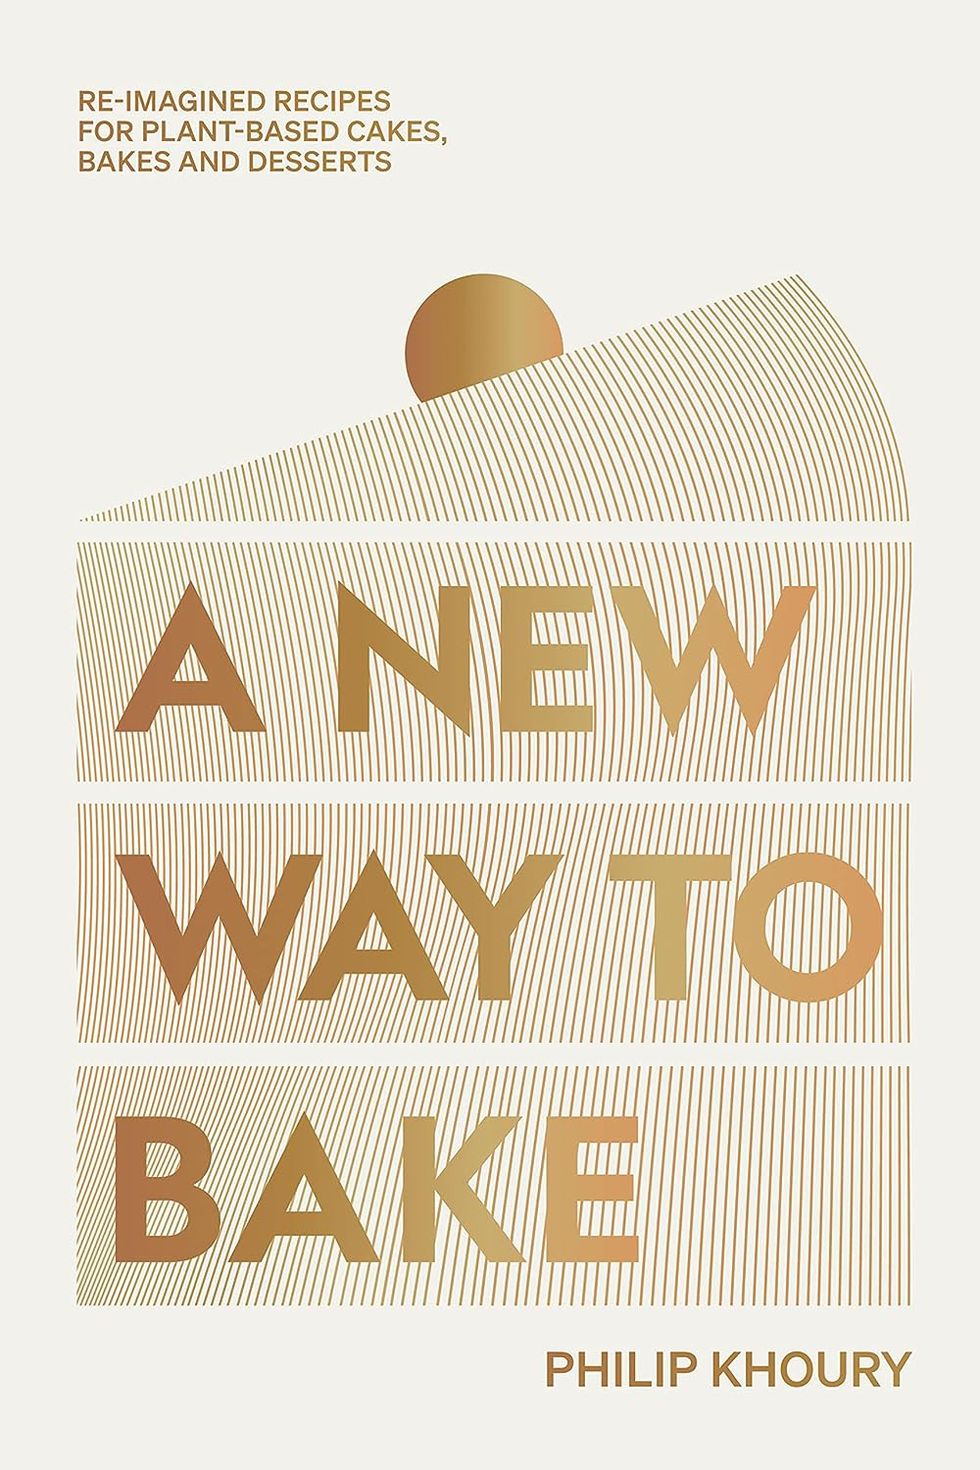 a new way to bake